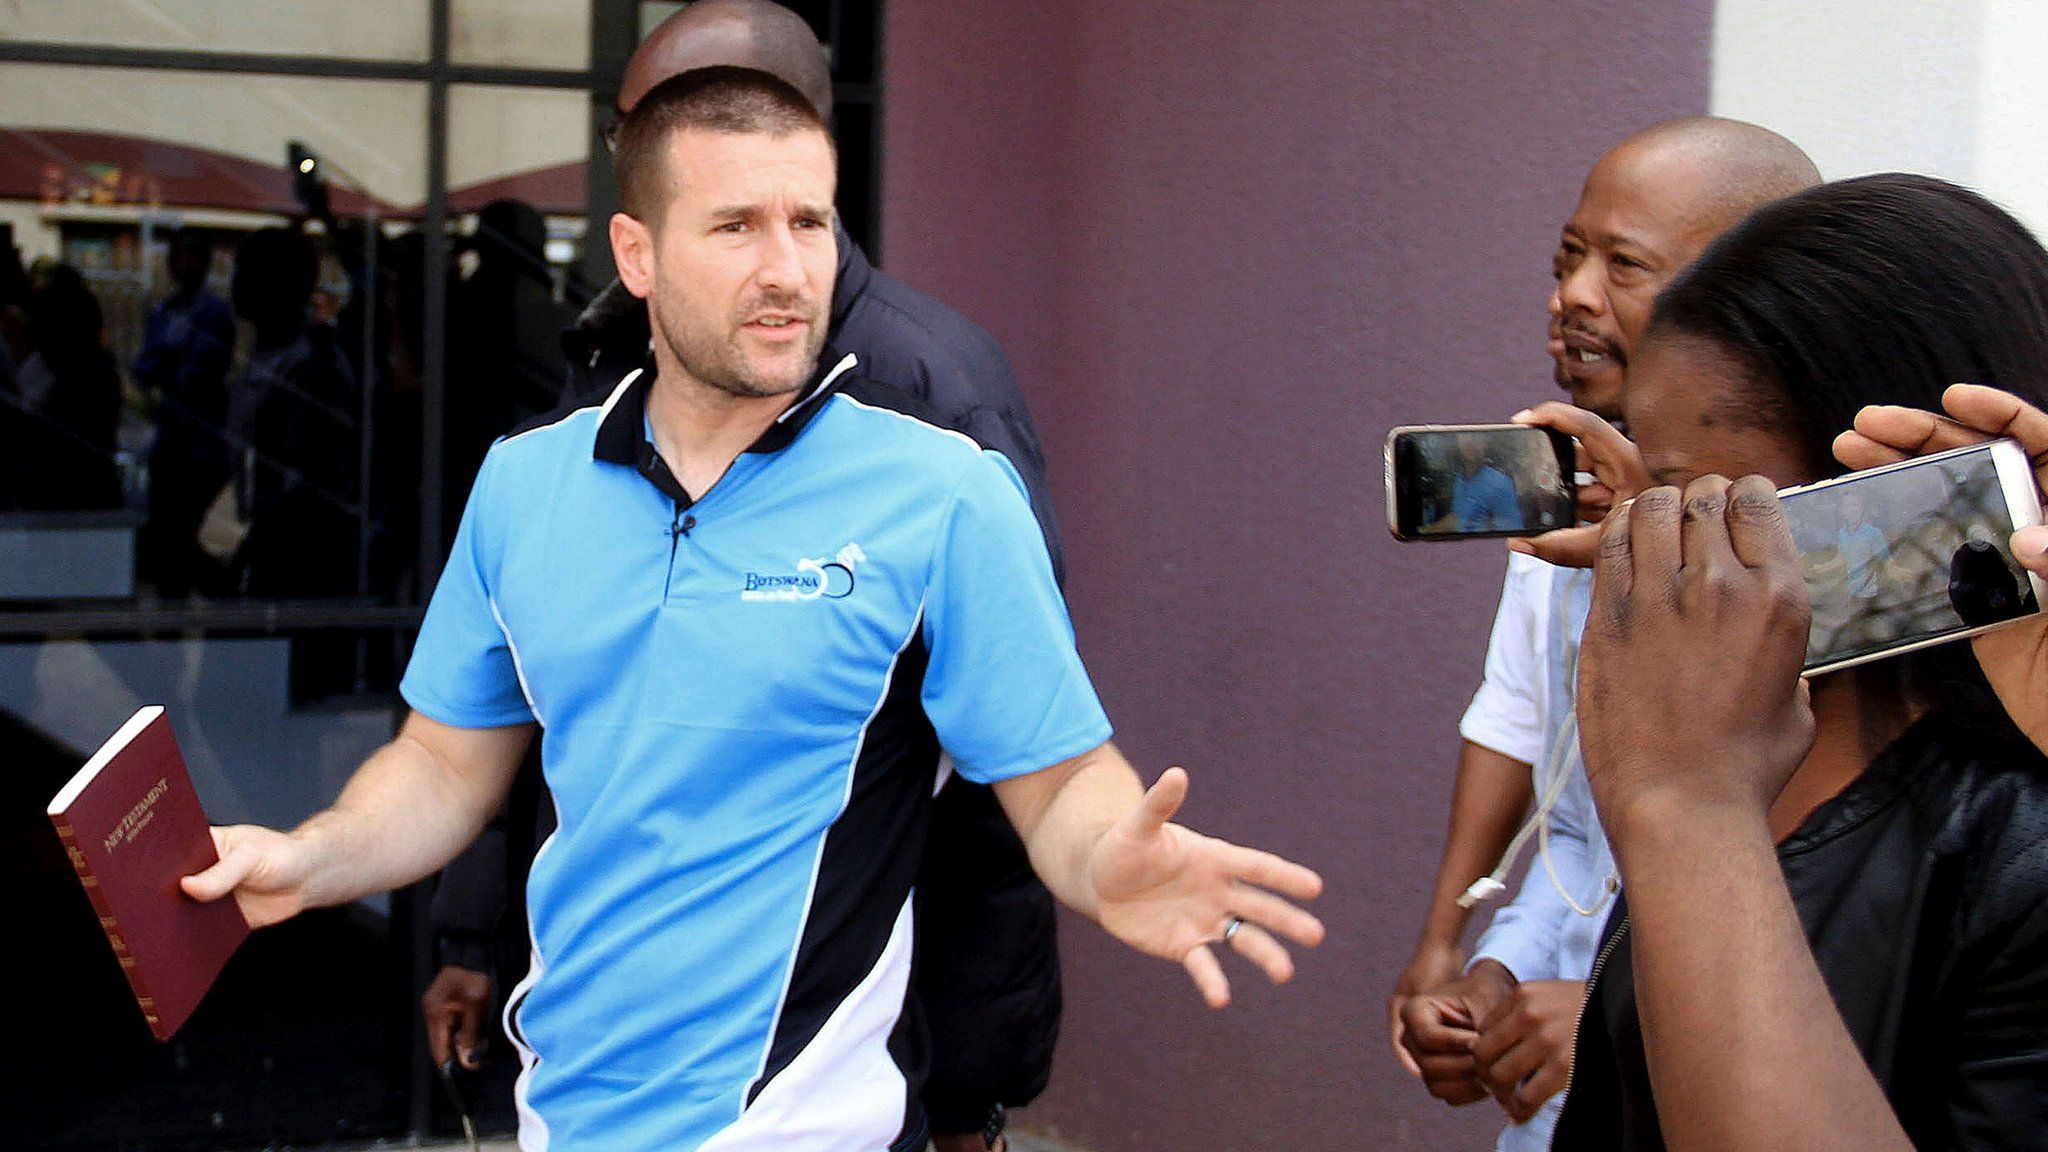 Controversial US Pastor Steven Anderson reacts as he leaves the Botswana Department of immigration after being issued a deportation order by Botswana authorities, on September 20, 2016, in Gaborone.